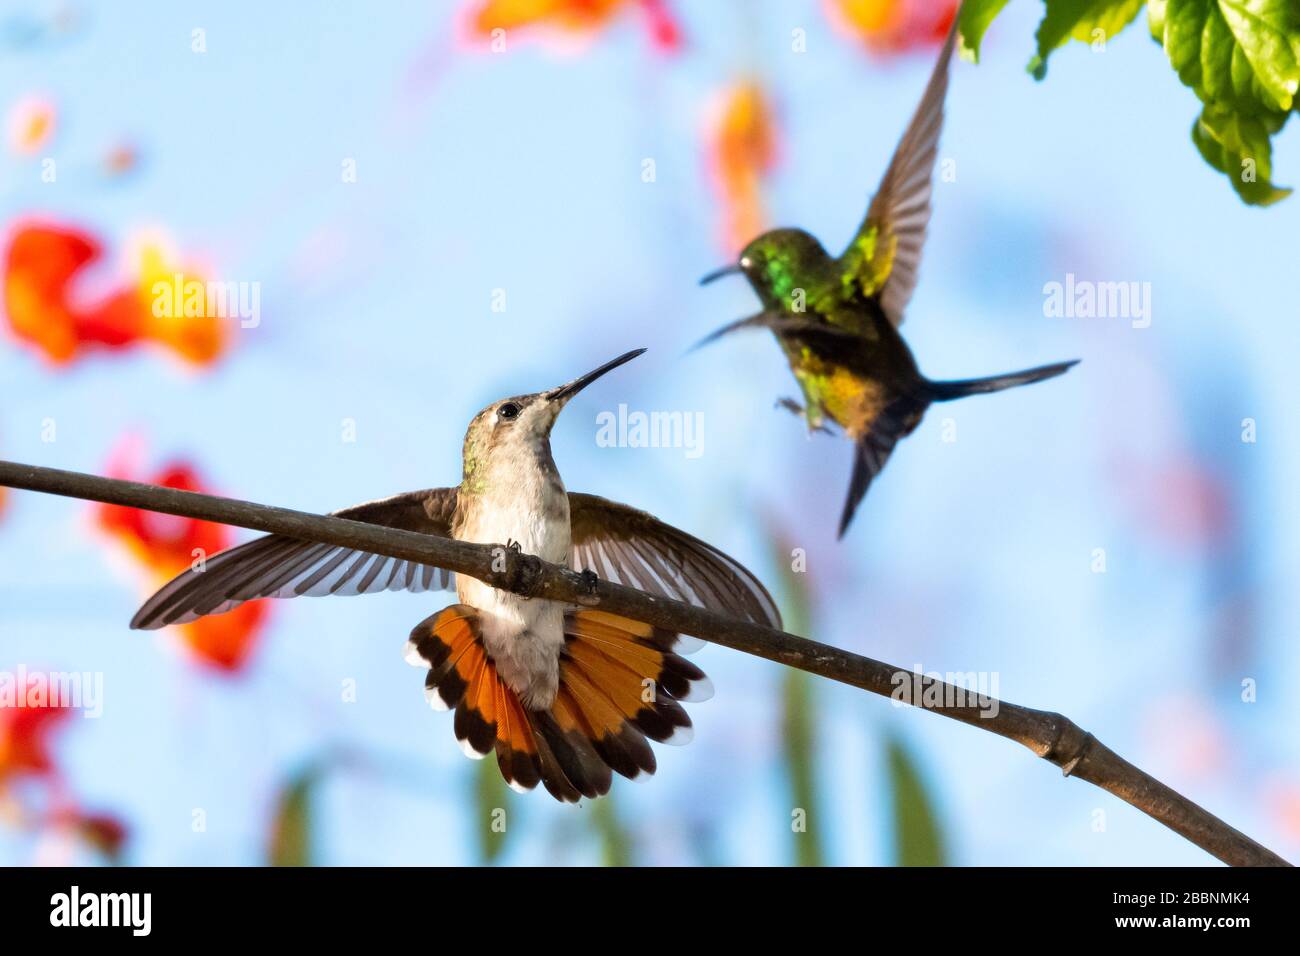 A Ruby Topaz hummingbird defending her perch from a Copper-rumped hummingbird in the early morning. Stock Photo